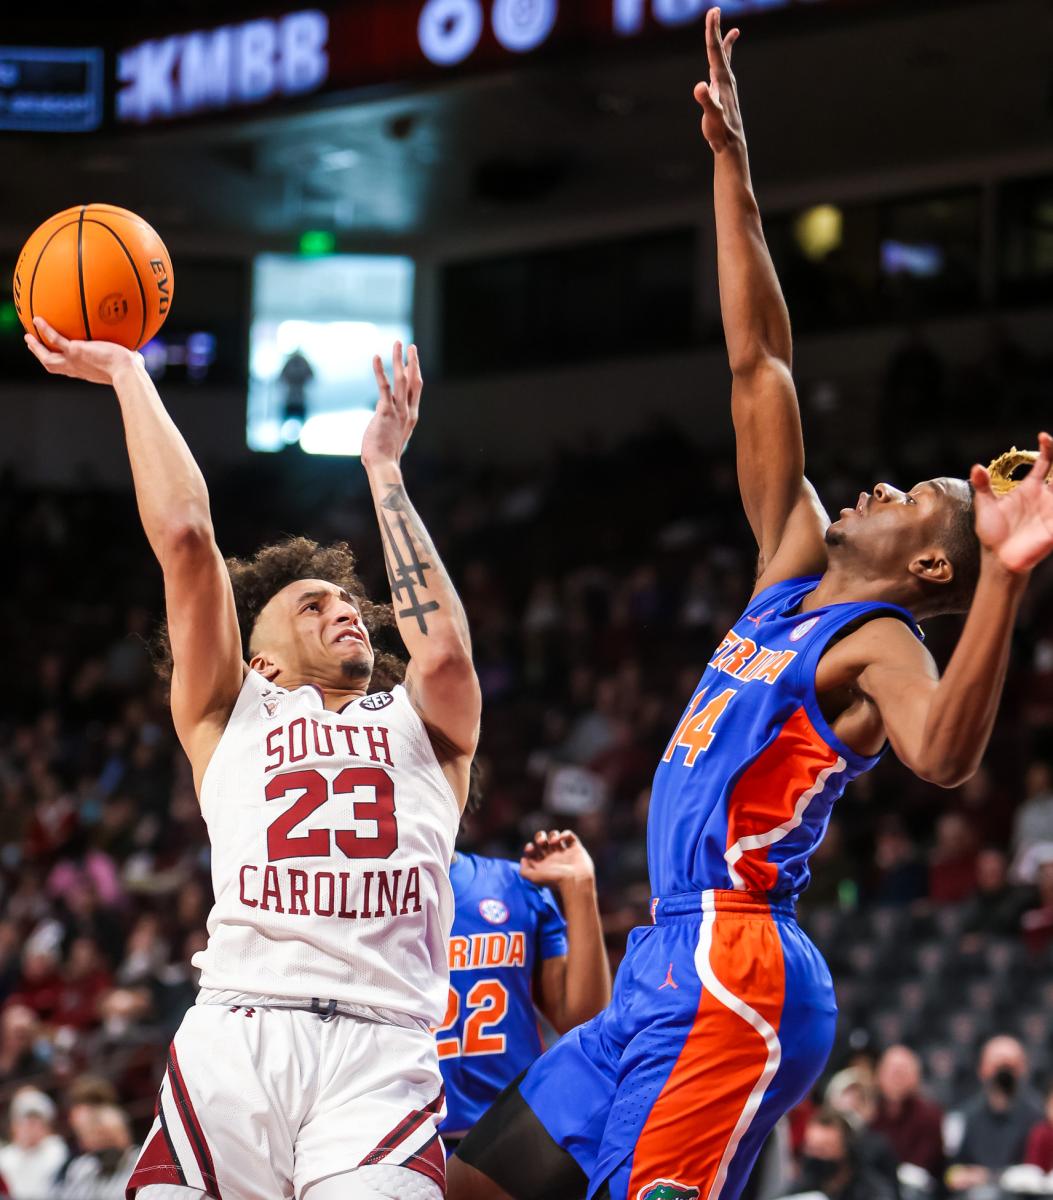 South Carolina Gamecocks guard Devin Carter (23) shoots over Florida Gators guard Kowacie Reeves (14) in the first half at Colonial Life Arena.